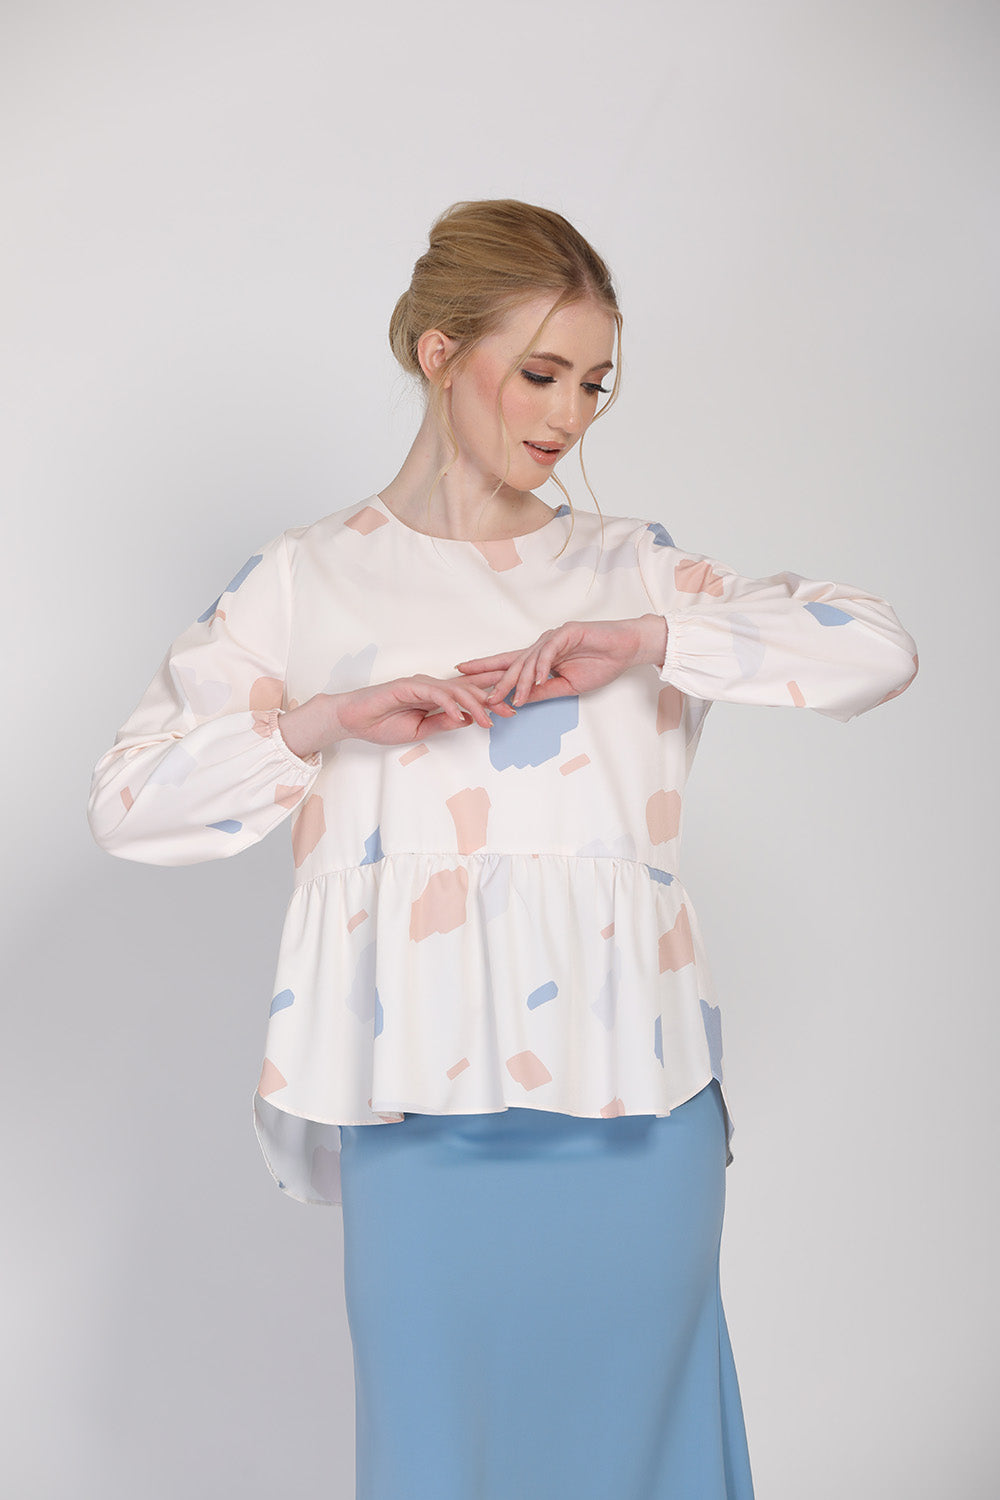 The Ceria 2.0 Abstract Prints Blouse in Nude